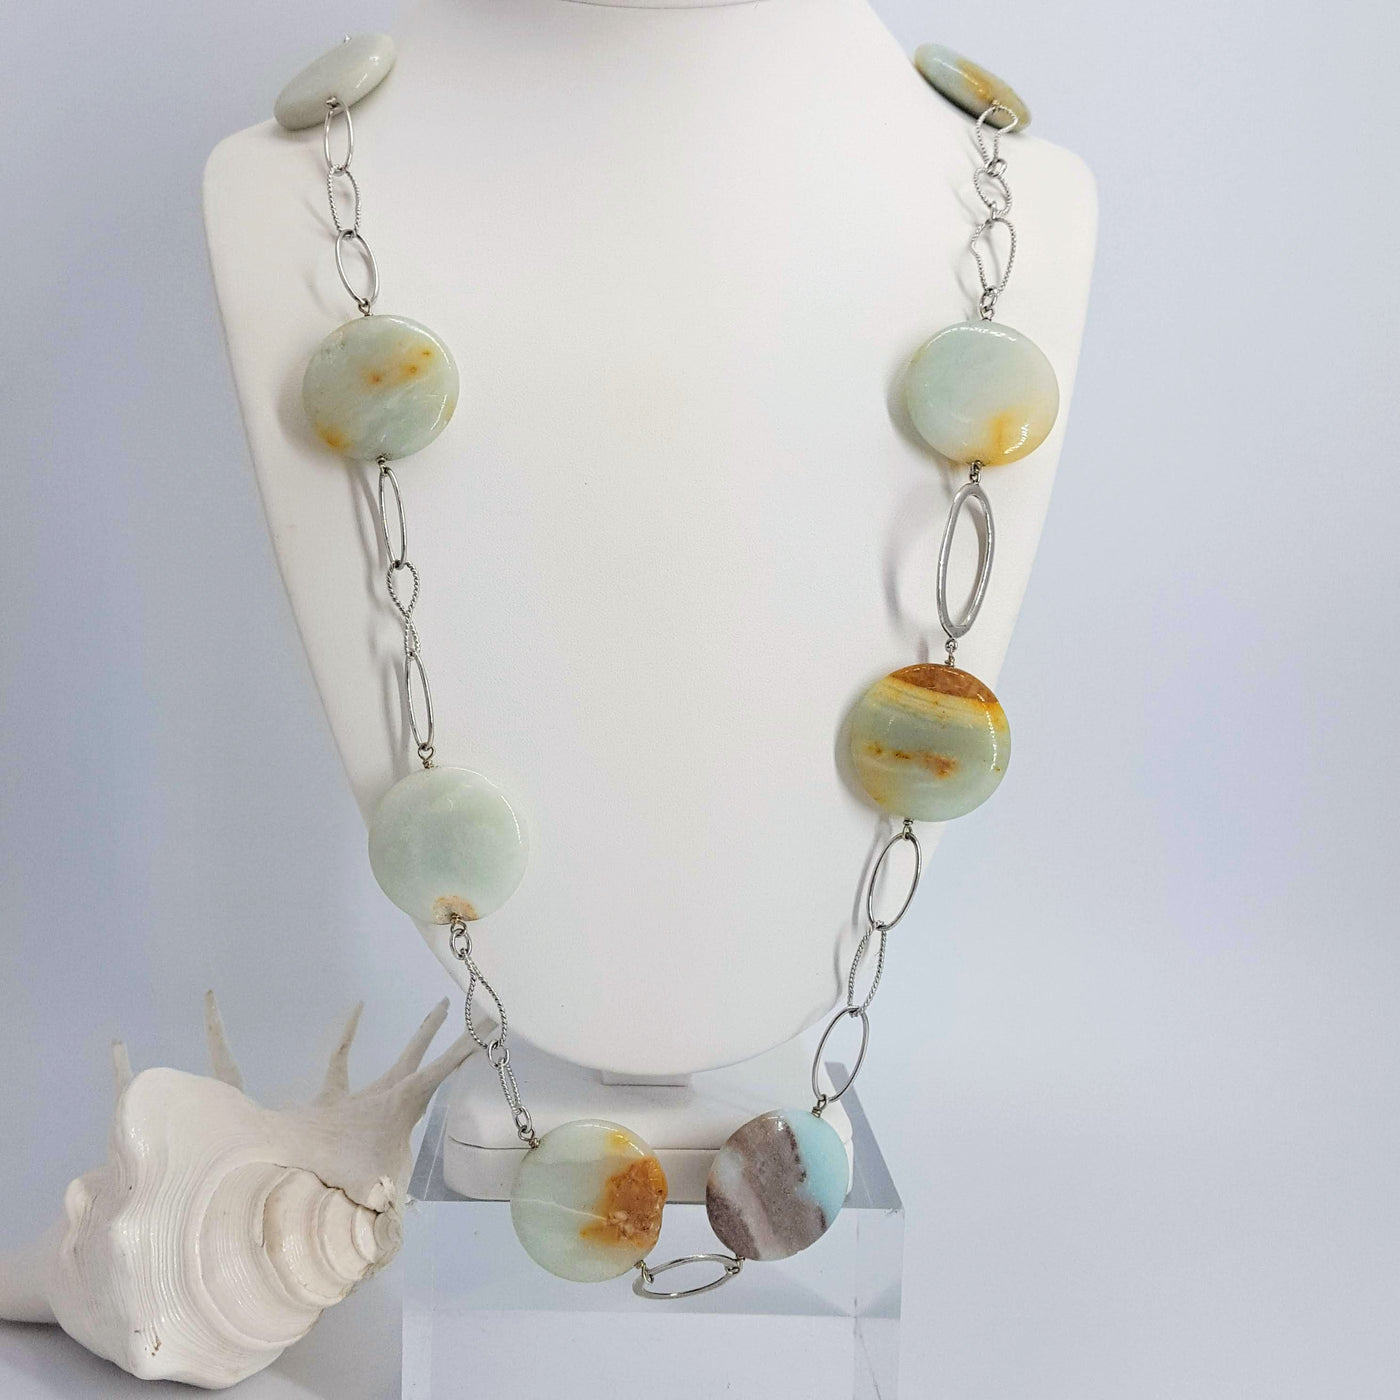 "Amazonite, ALL-Right!" 30" Necklace - Amazonite, Sterling